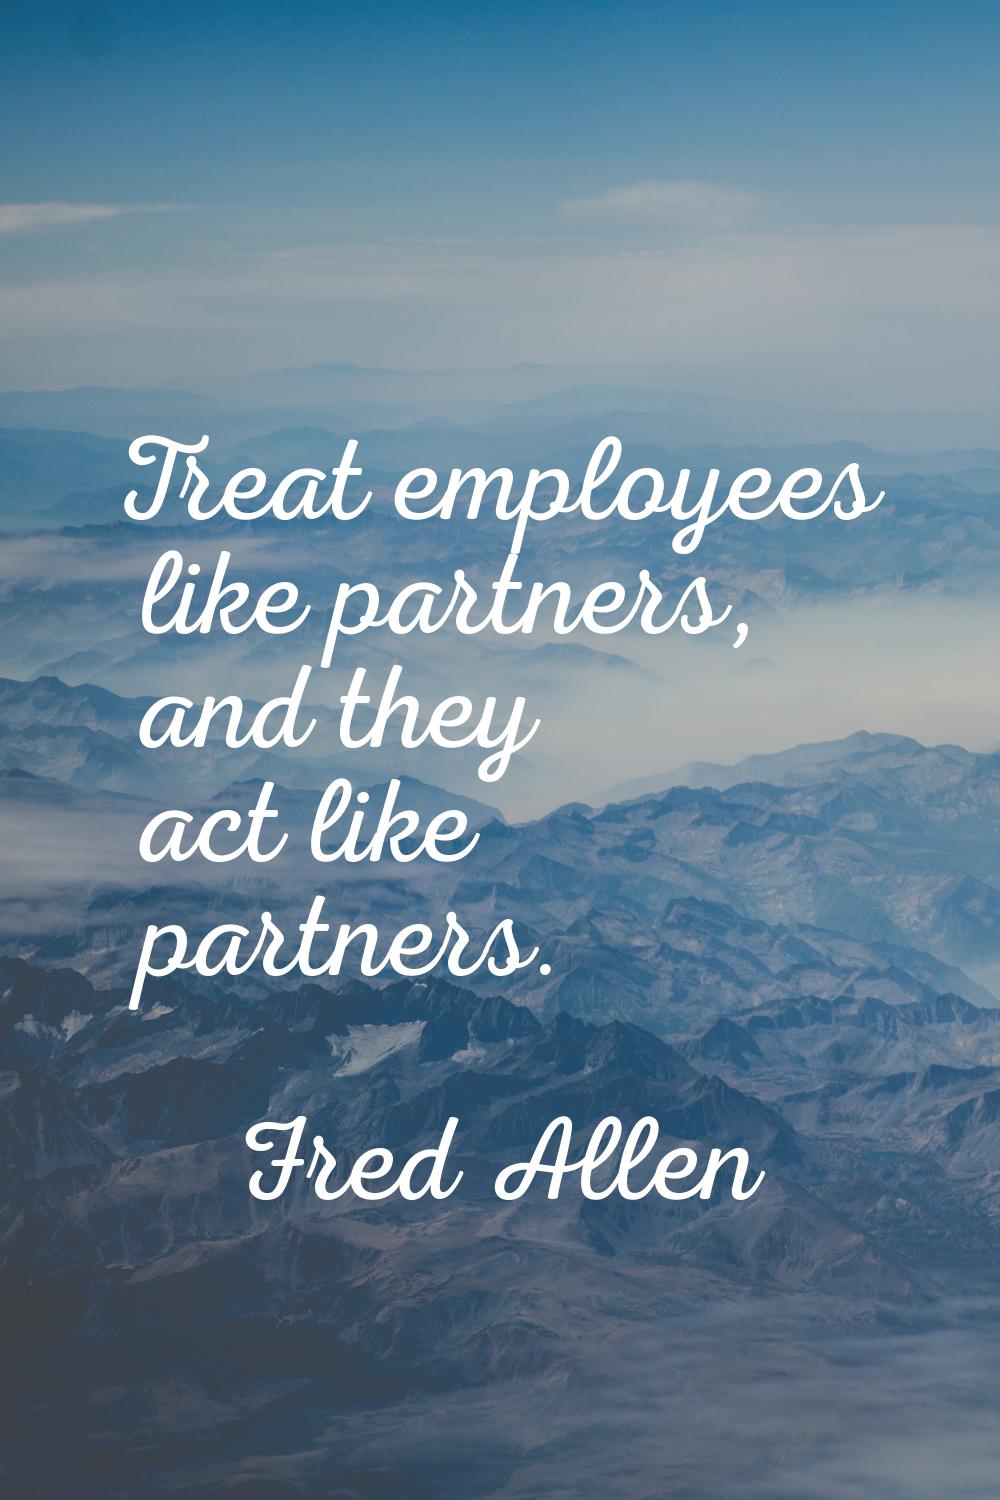 Treat employees like partners, and they act like partners.